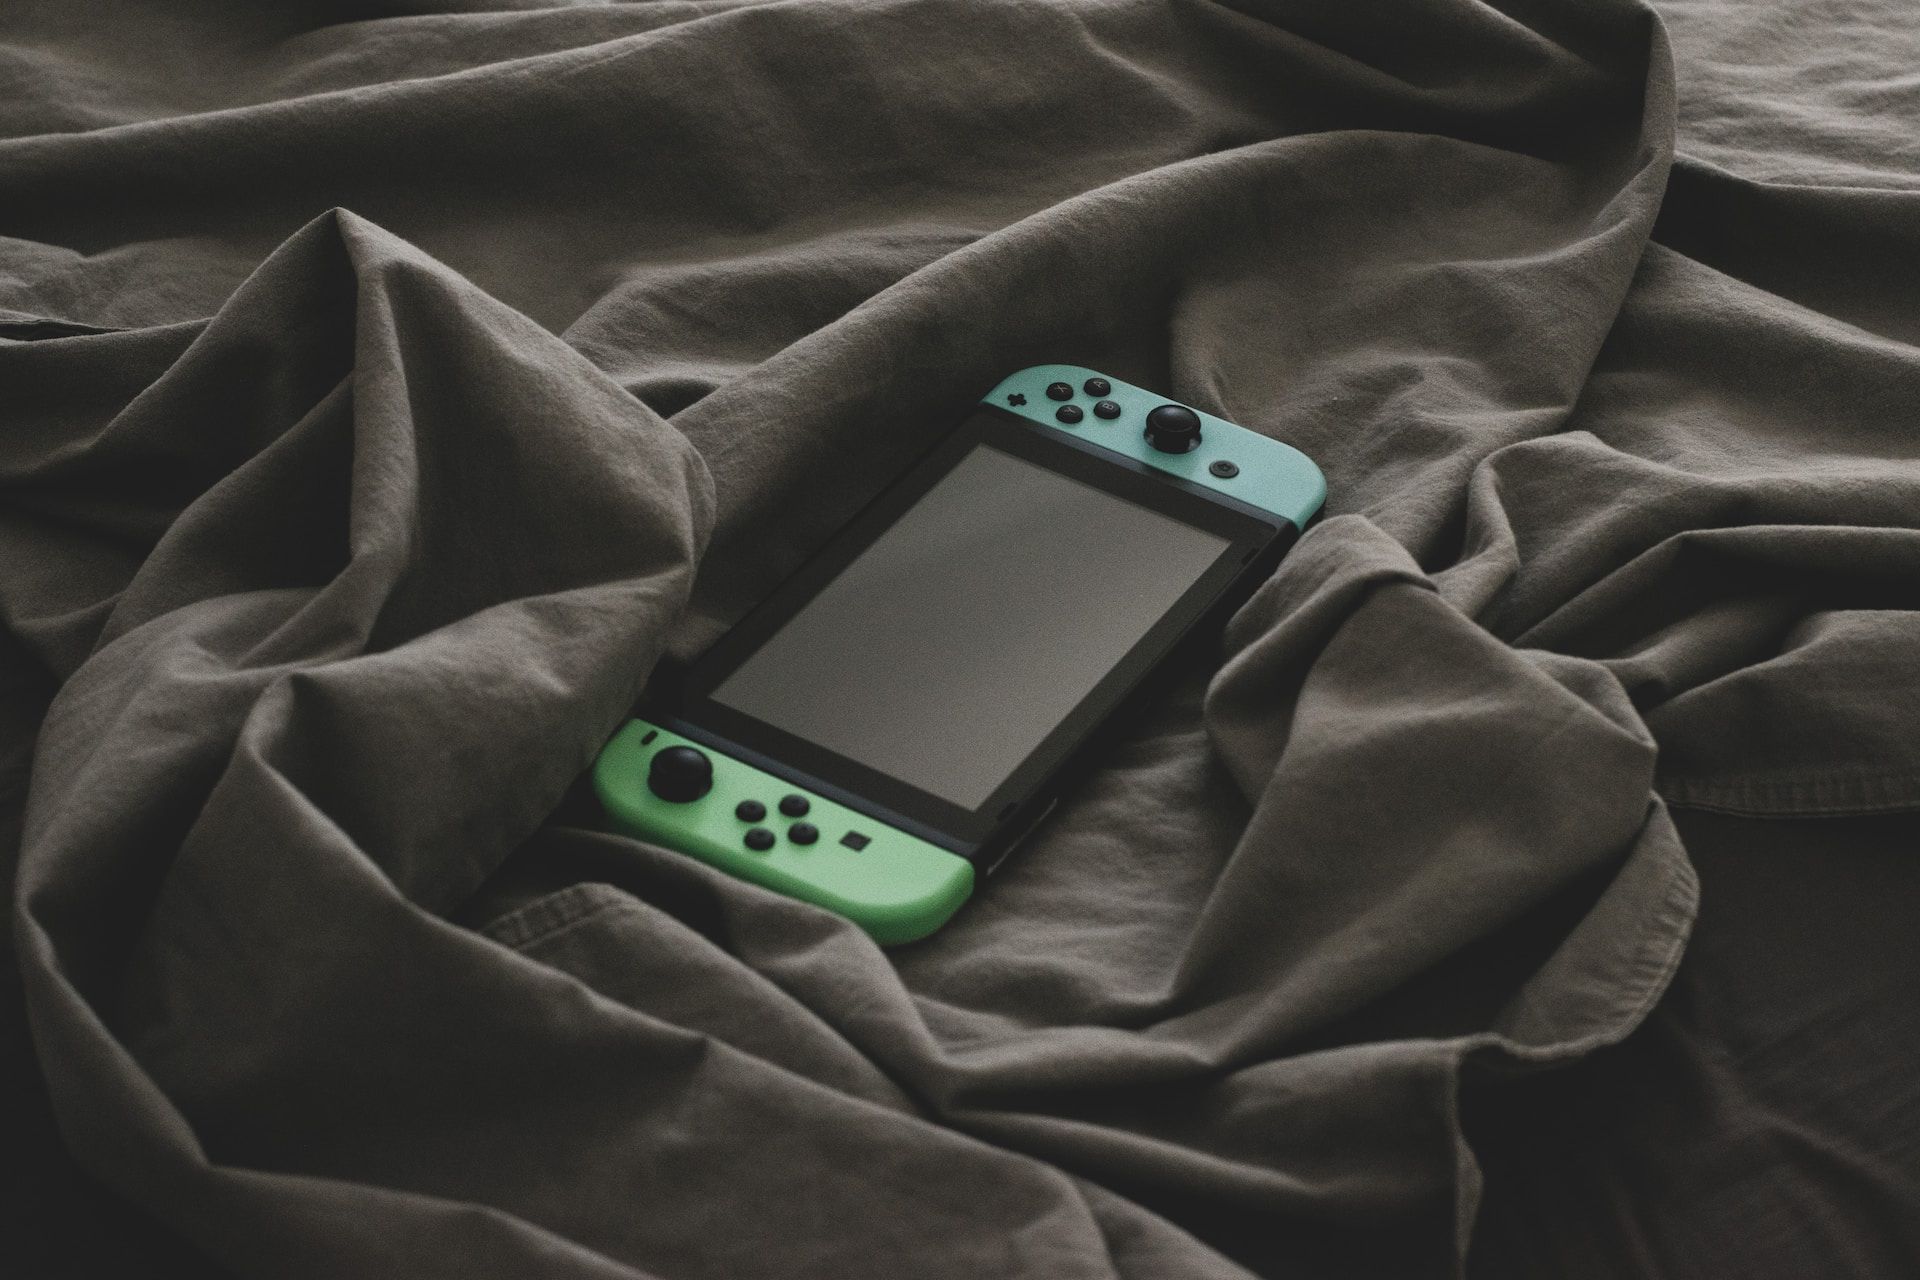 A Nintendo Switch with blue and green JoyCons sitting on a wrinkled grey bedsheet.